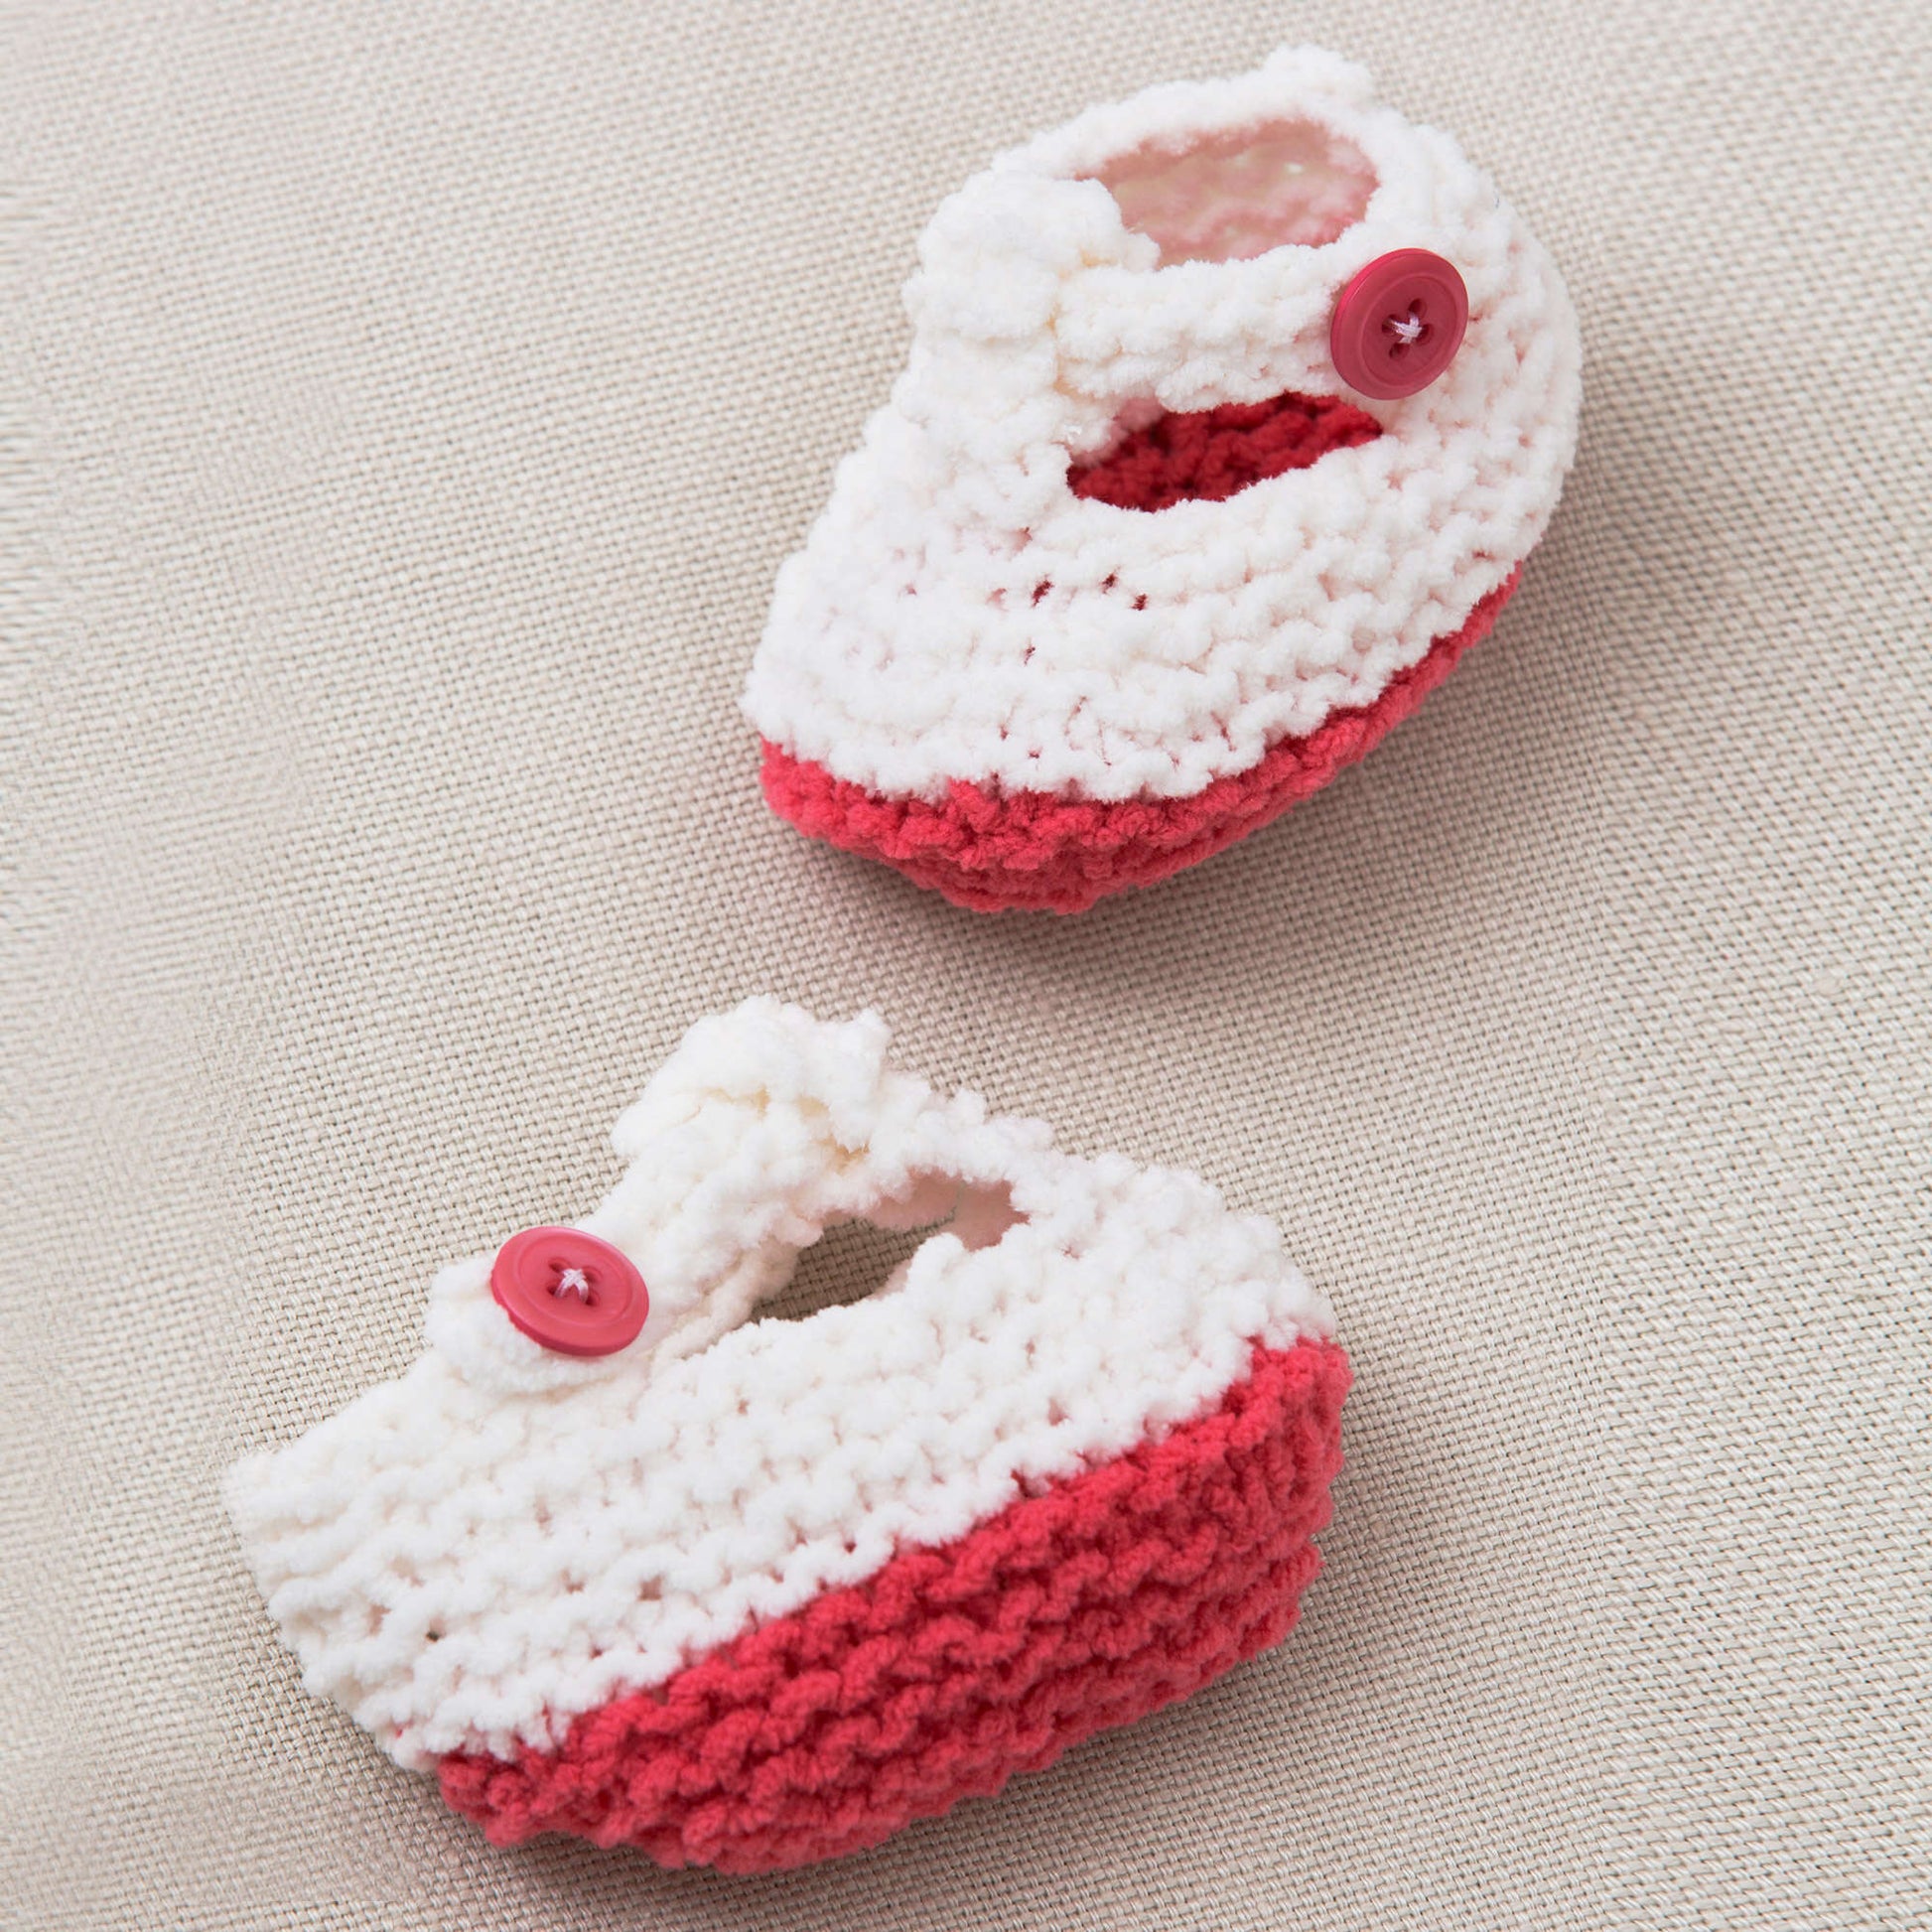 Free Red Heart Knit Coral Cutie Hat & Booties Pattern